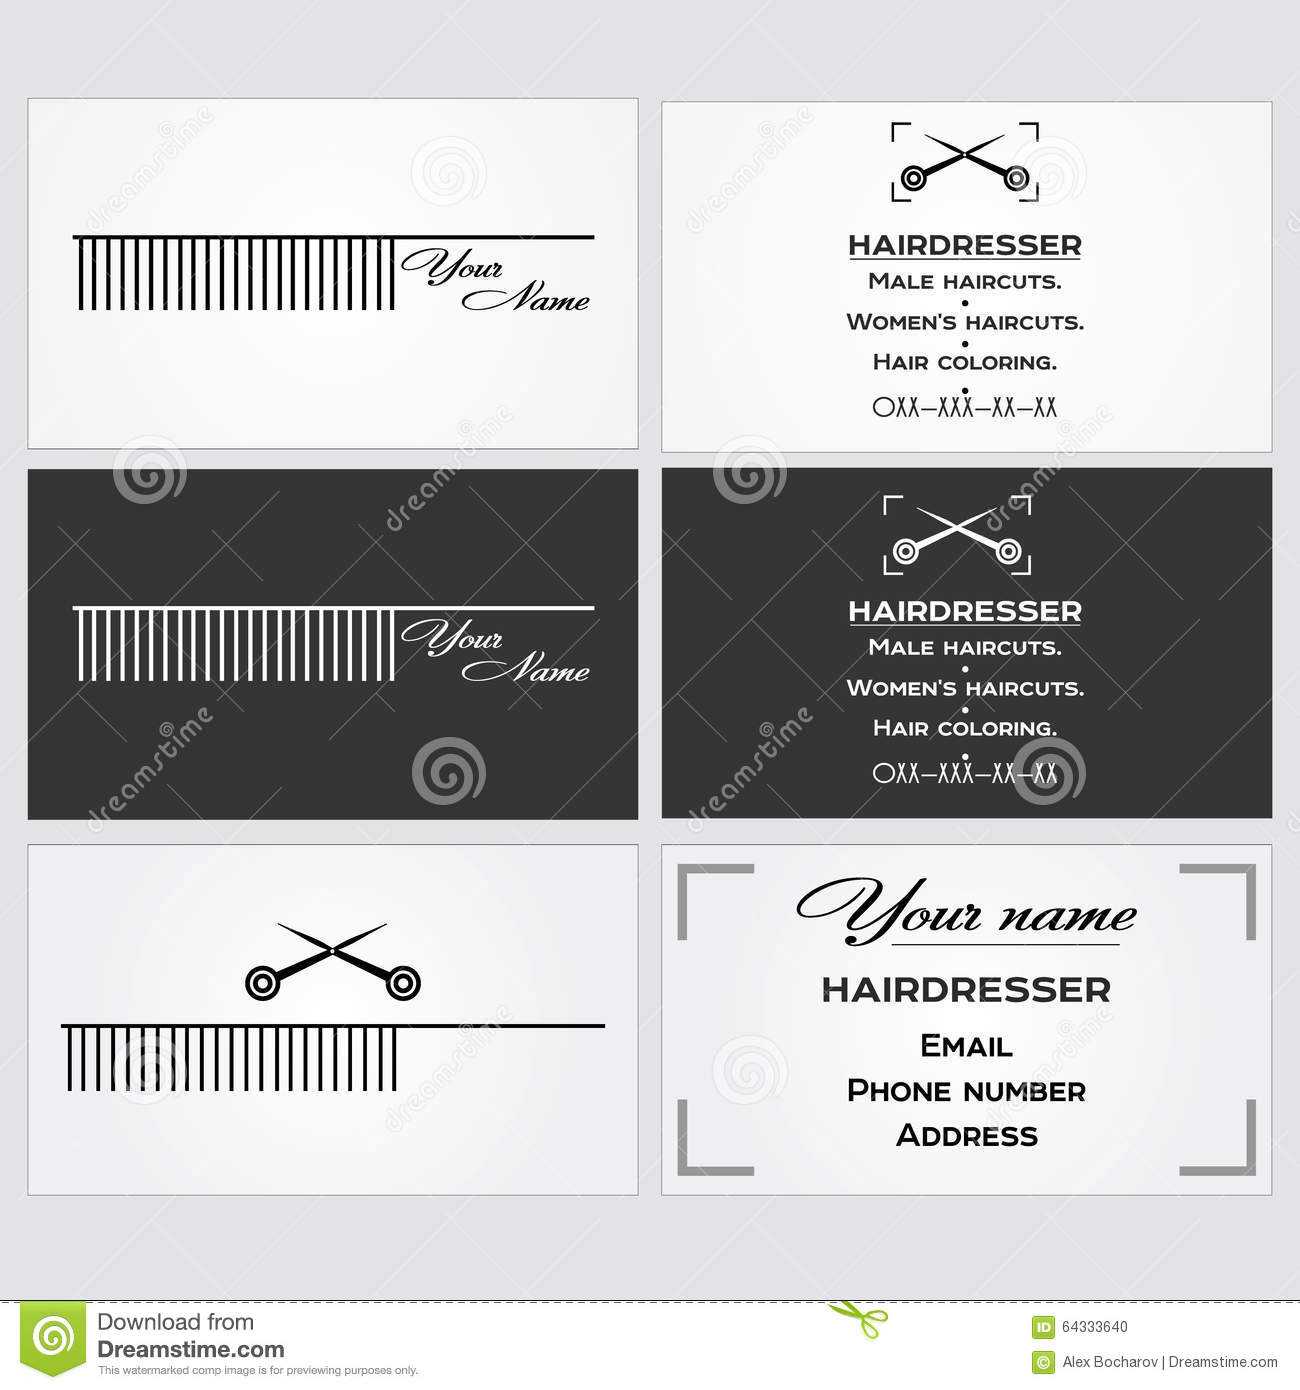 Business Card Template For A Hairdresser. Stock Vector Pertaining To Hairdresser Business Card Templates Free